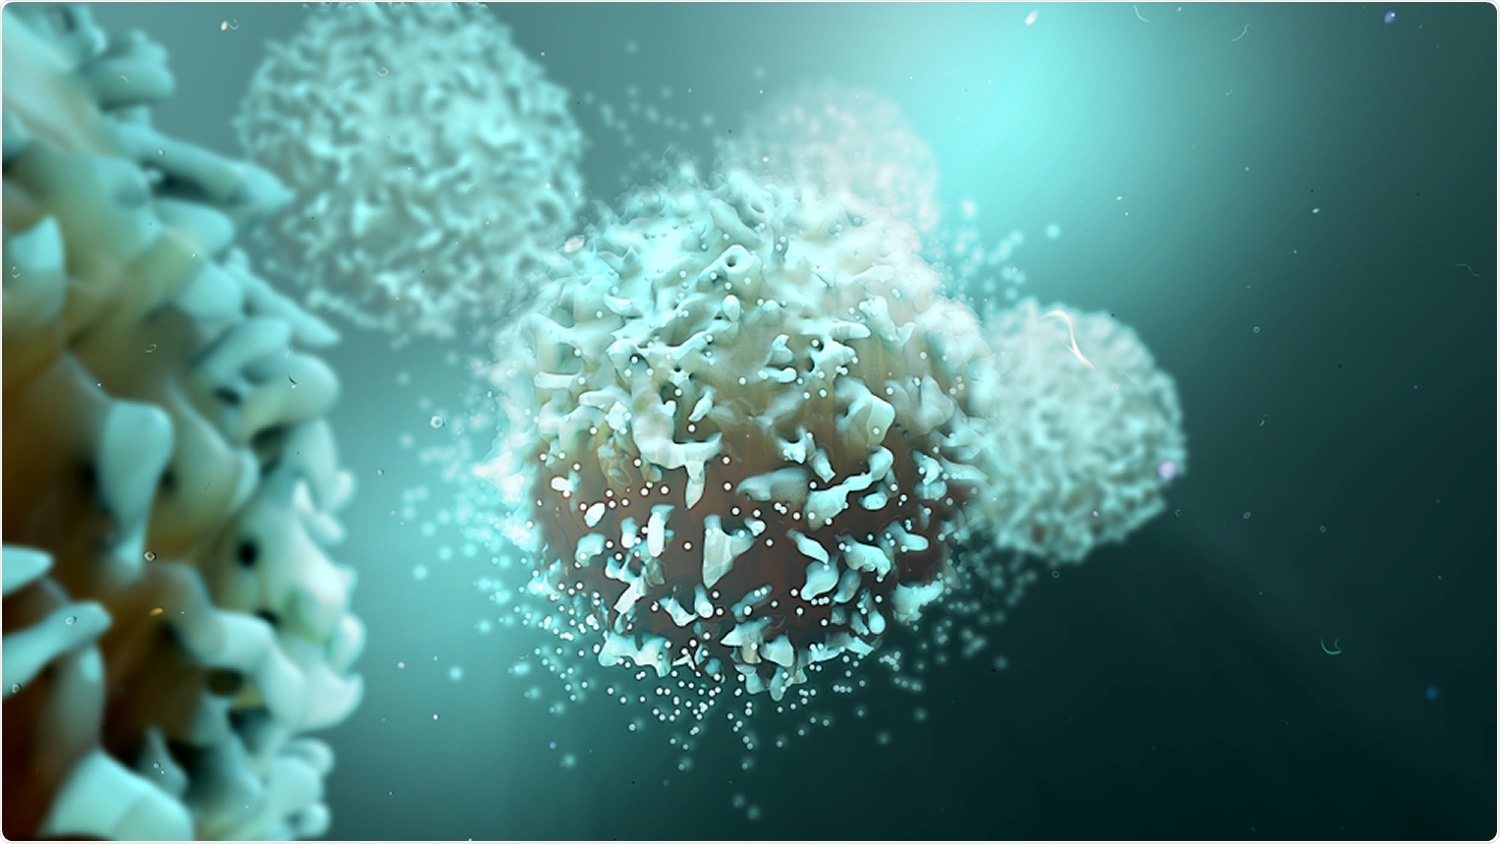 Study: Public T-cell epitopes shared among SARS-CoV-2 variants are presented on prevalent HLA class I alleles. Image Credit: Design_Cells / Shutterstock